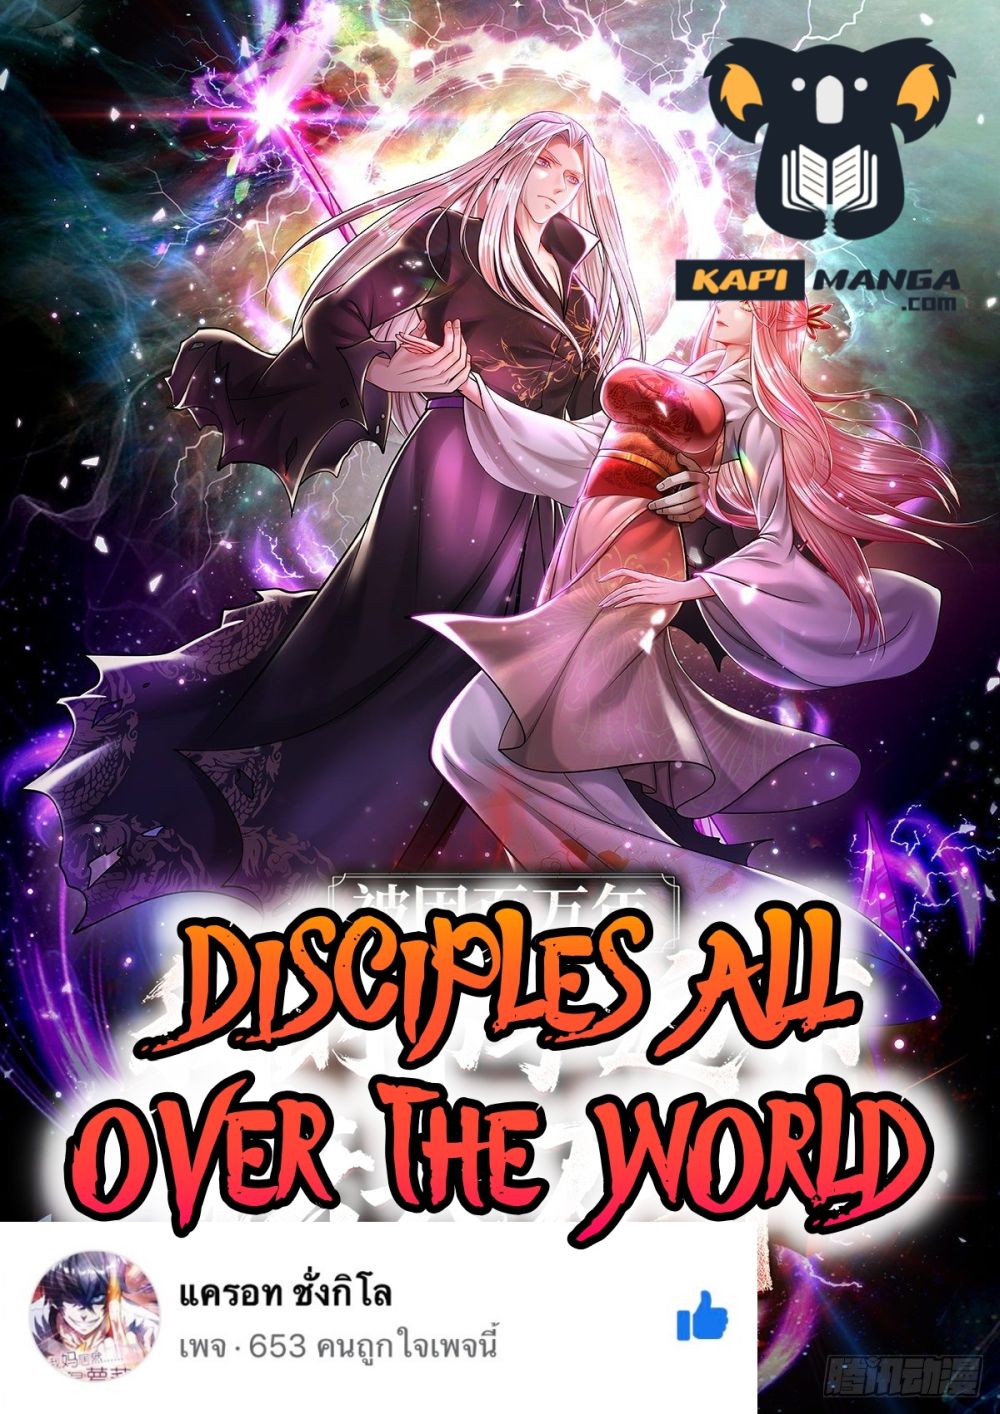 Disciples All Over the World à¸à¸­à¸à¸à¸µà¹ 41 (1)